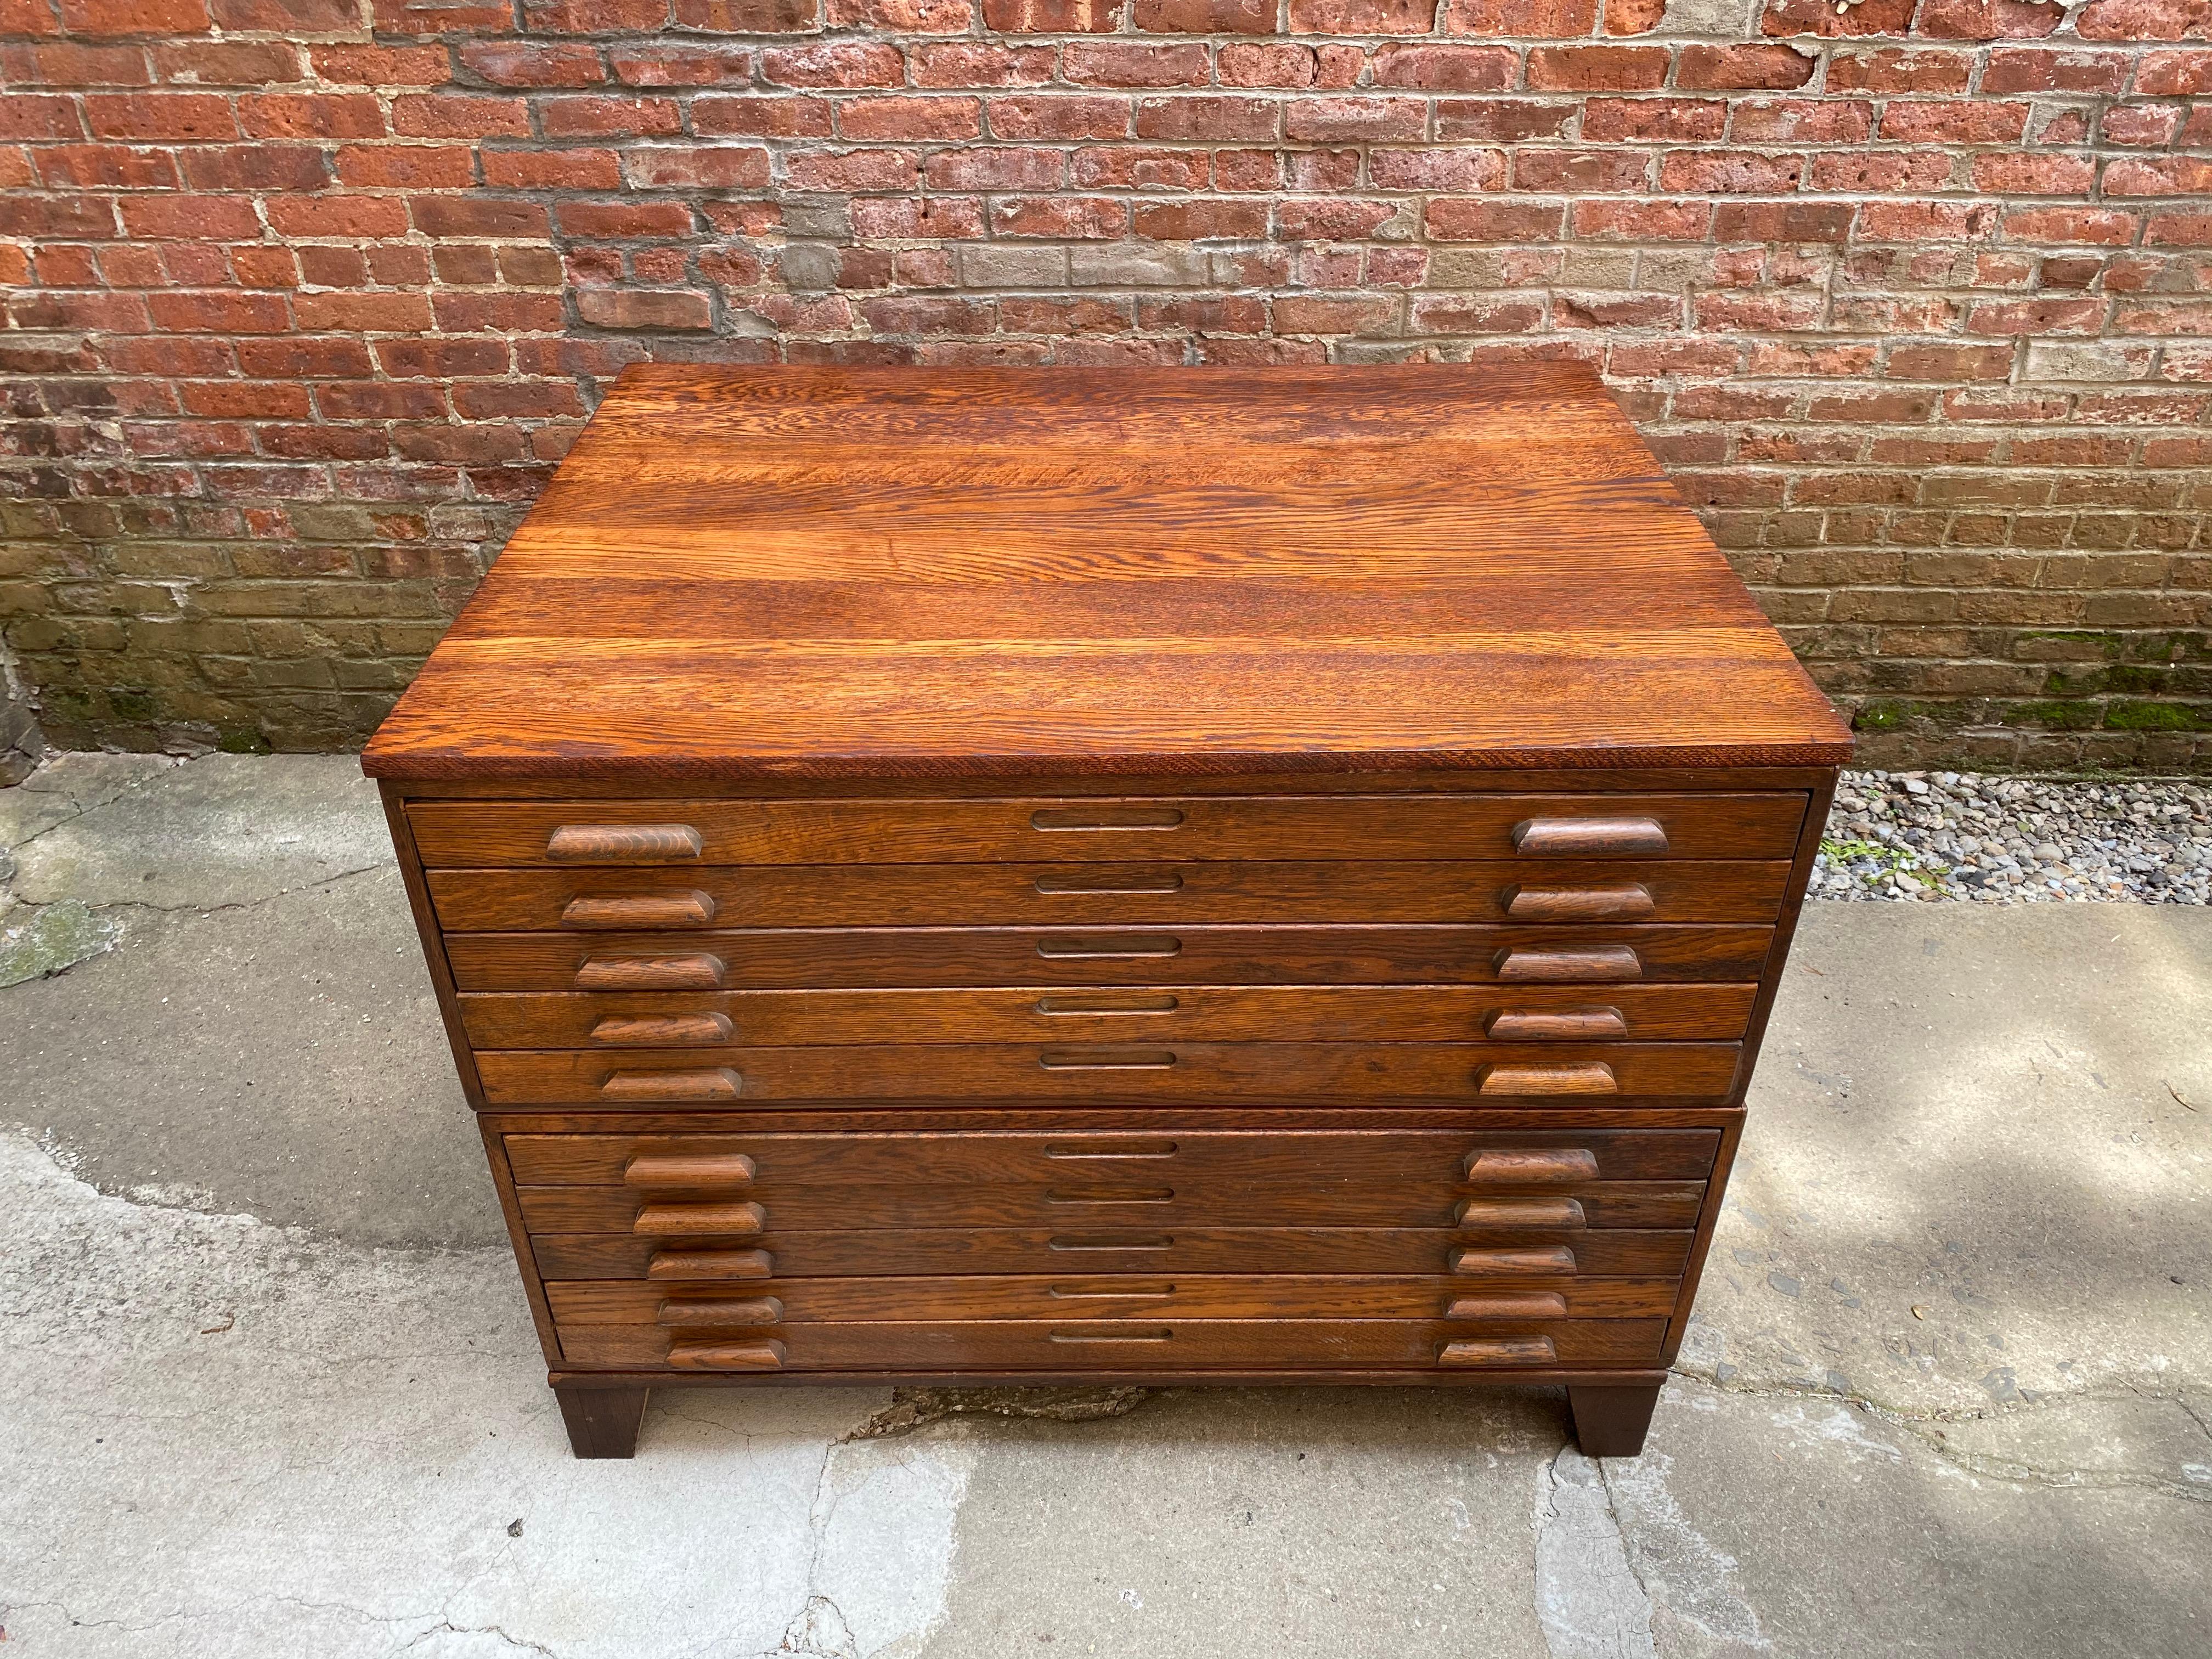 Solid oak construction with 10 flat drawers. The piece is comprised of two 5 drawer units that stack onto a sturdy footed base and a 